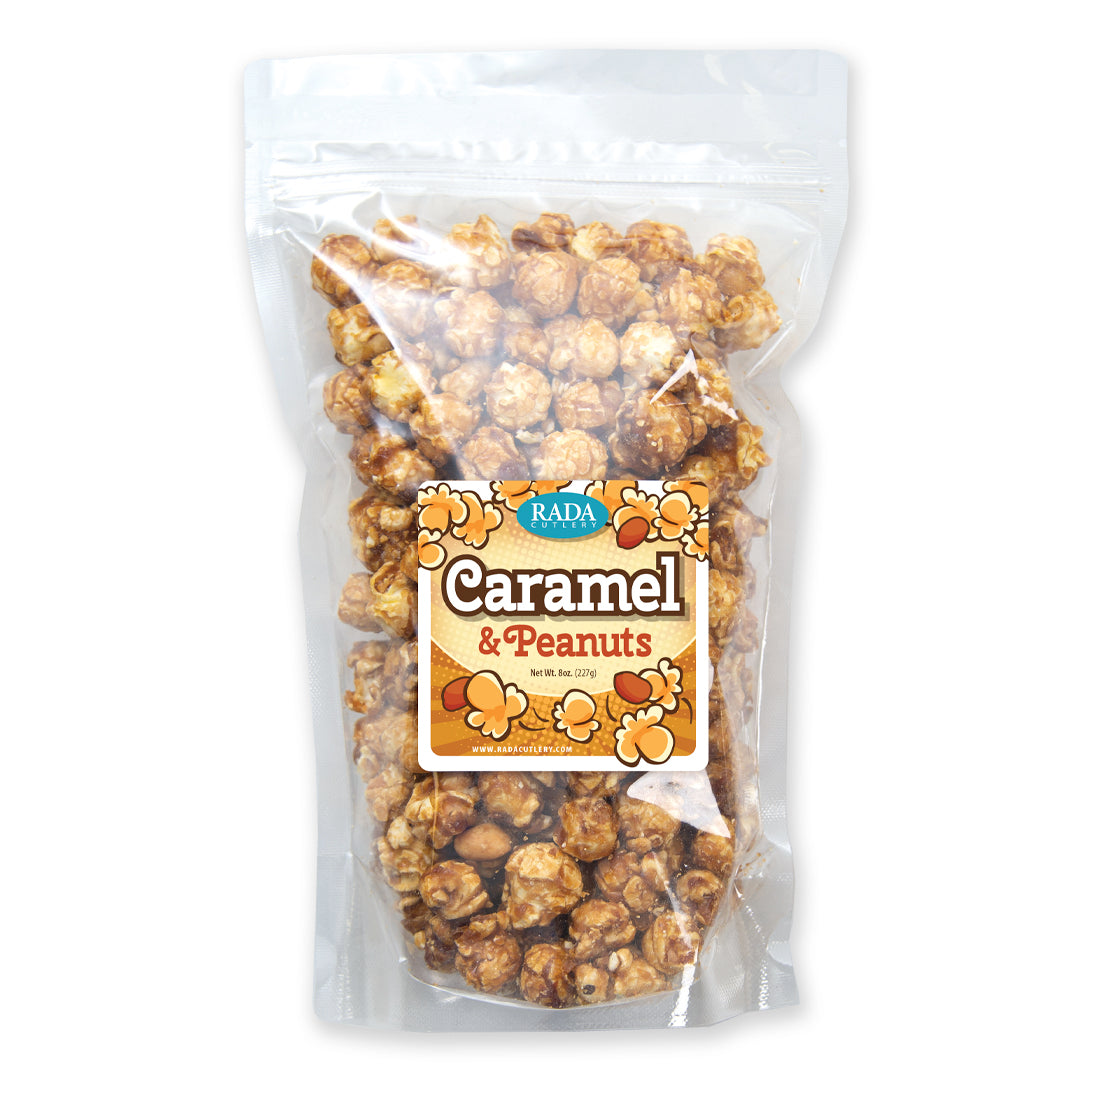 Caramel & peanuts in a resealable bag with a Rada Cutlery logo on the front.